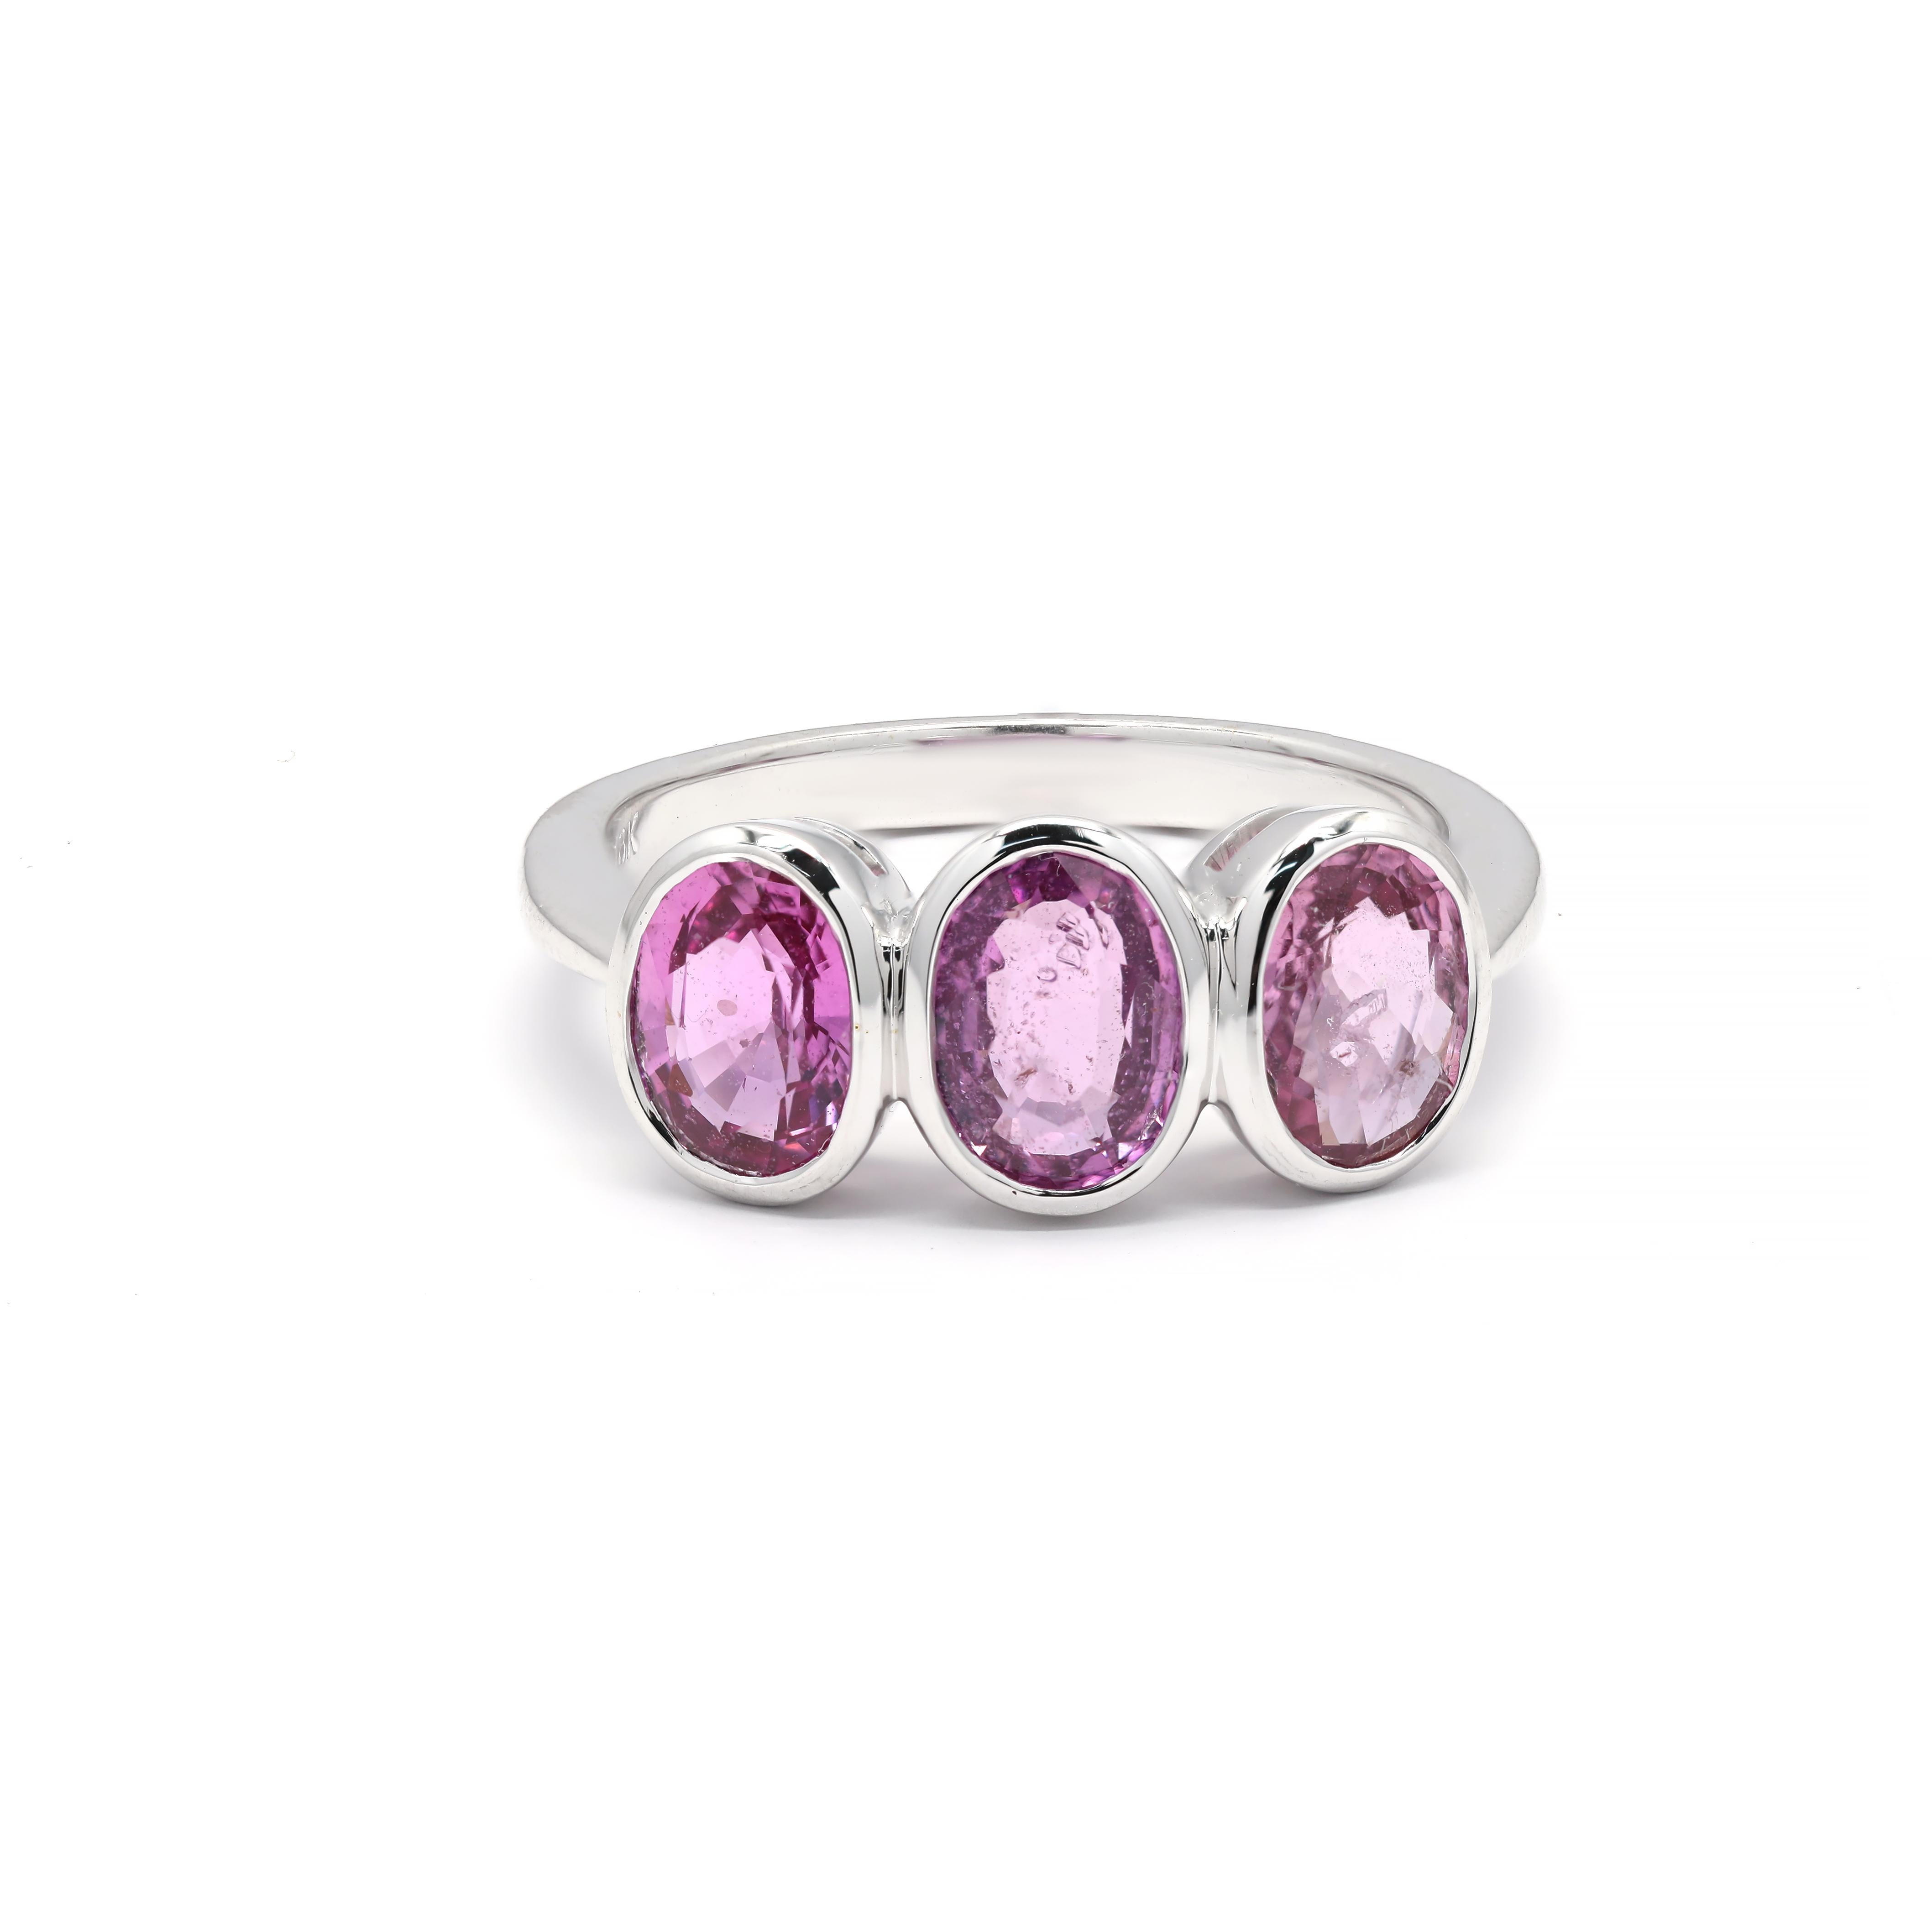 For Sale:  3.54 ct Three Pink Sapphire Gemstone Ring in 18K White Gold, Three Stone Ring 2